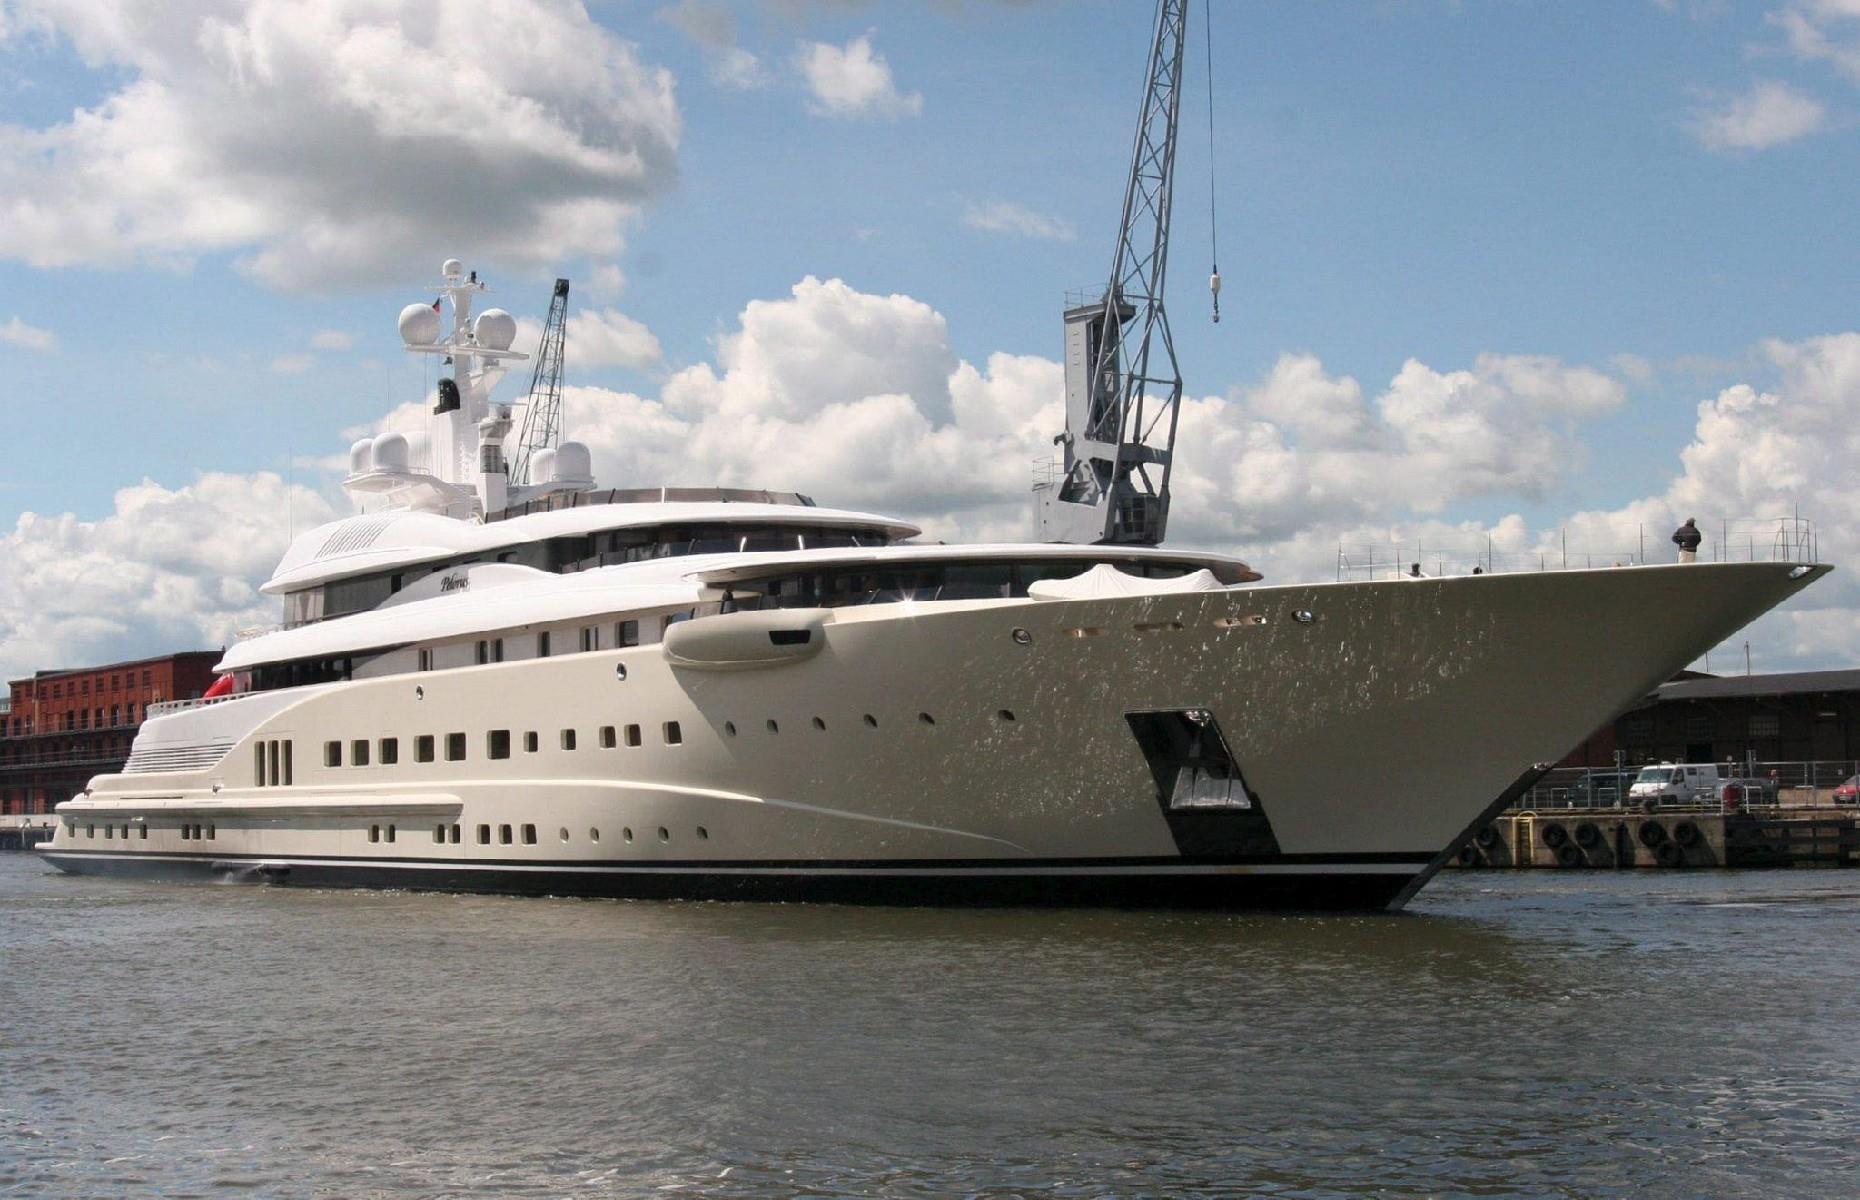 <p>The 377-foot (115m) Lurssen-built Pelorus was bought by Russian oligarch Roman Abramovich in 2004. His ex-wife Irina was given the yacht in 2009 as part of the divorce settlement, and she sold it on to Dreamworks co-founder David Geffen in 2011. The vessel changed hands again later that year when it was bought by the royal family of Abu Dhabi for a reported €214 million ($296m/£182m) and it was finally acquired by Chinese billionaire Samuel Tak Lee in 2016. We're sure he wasn't disappointed with his purchase – the wonder vessel has everything from multiple swimming pools to two helipads.</p>